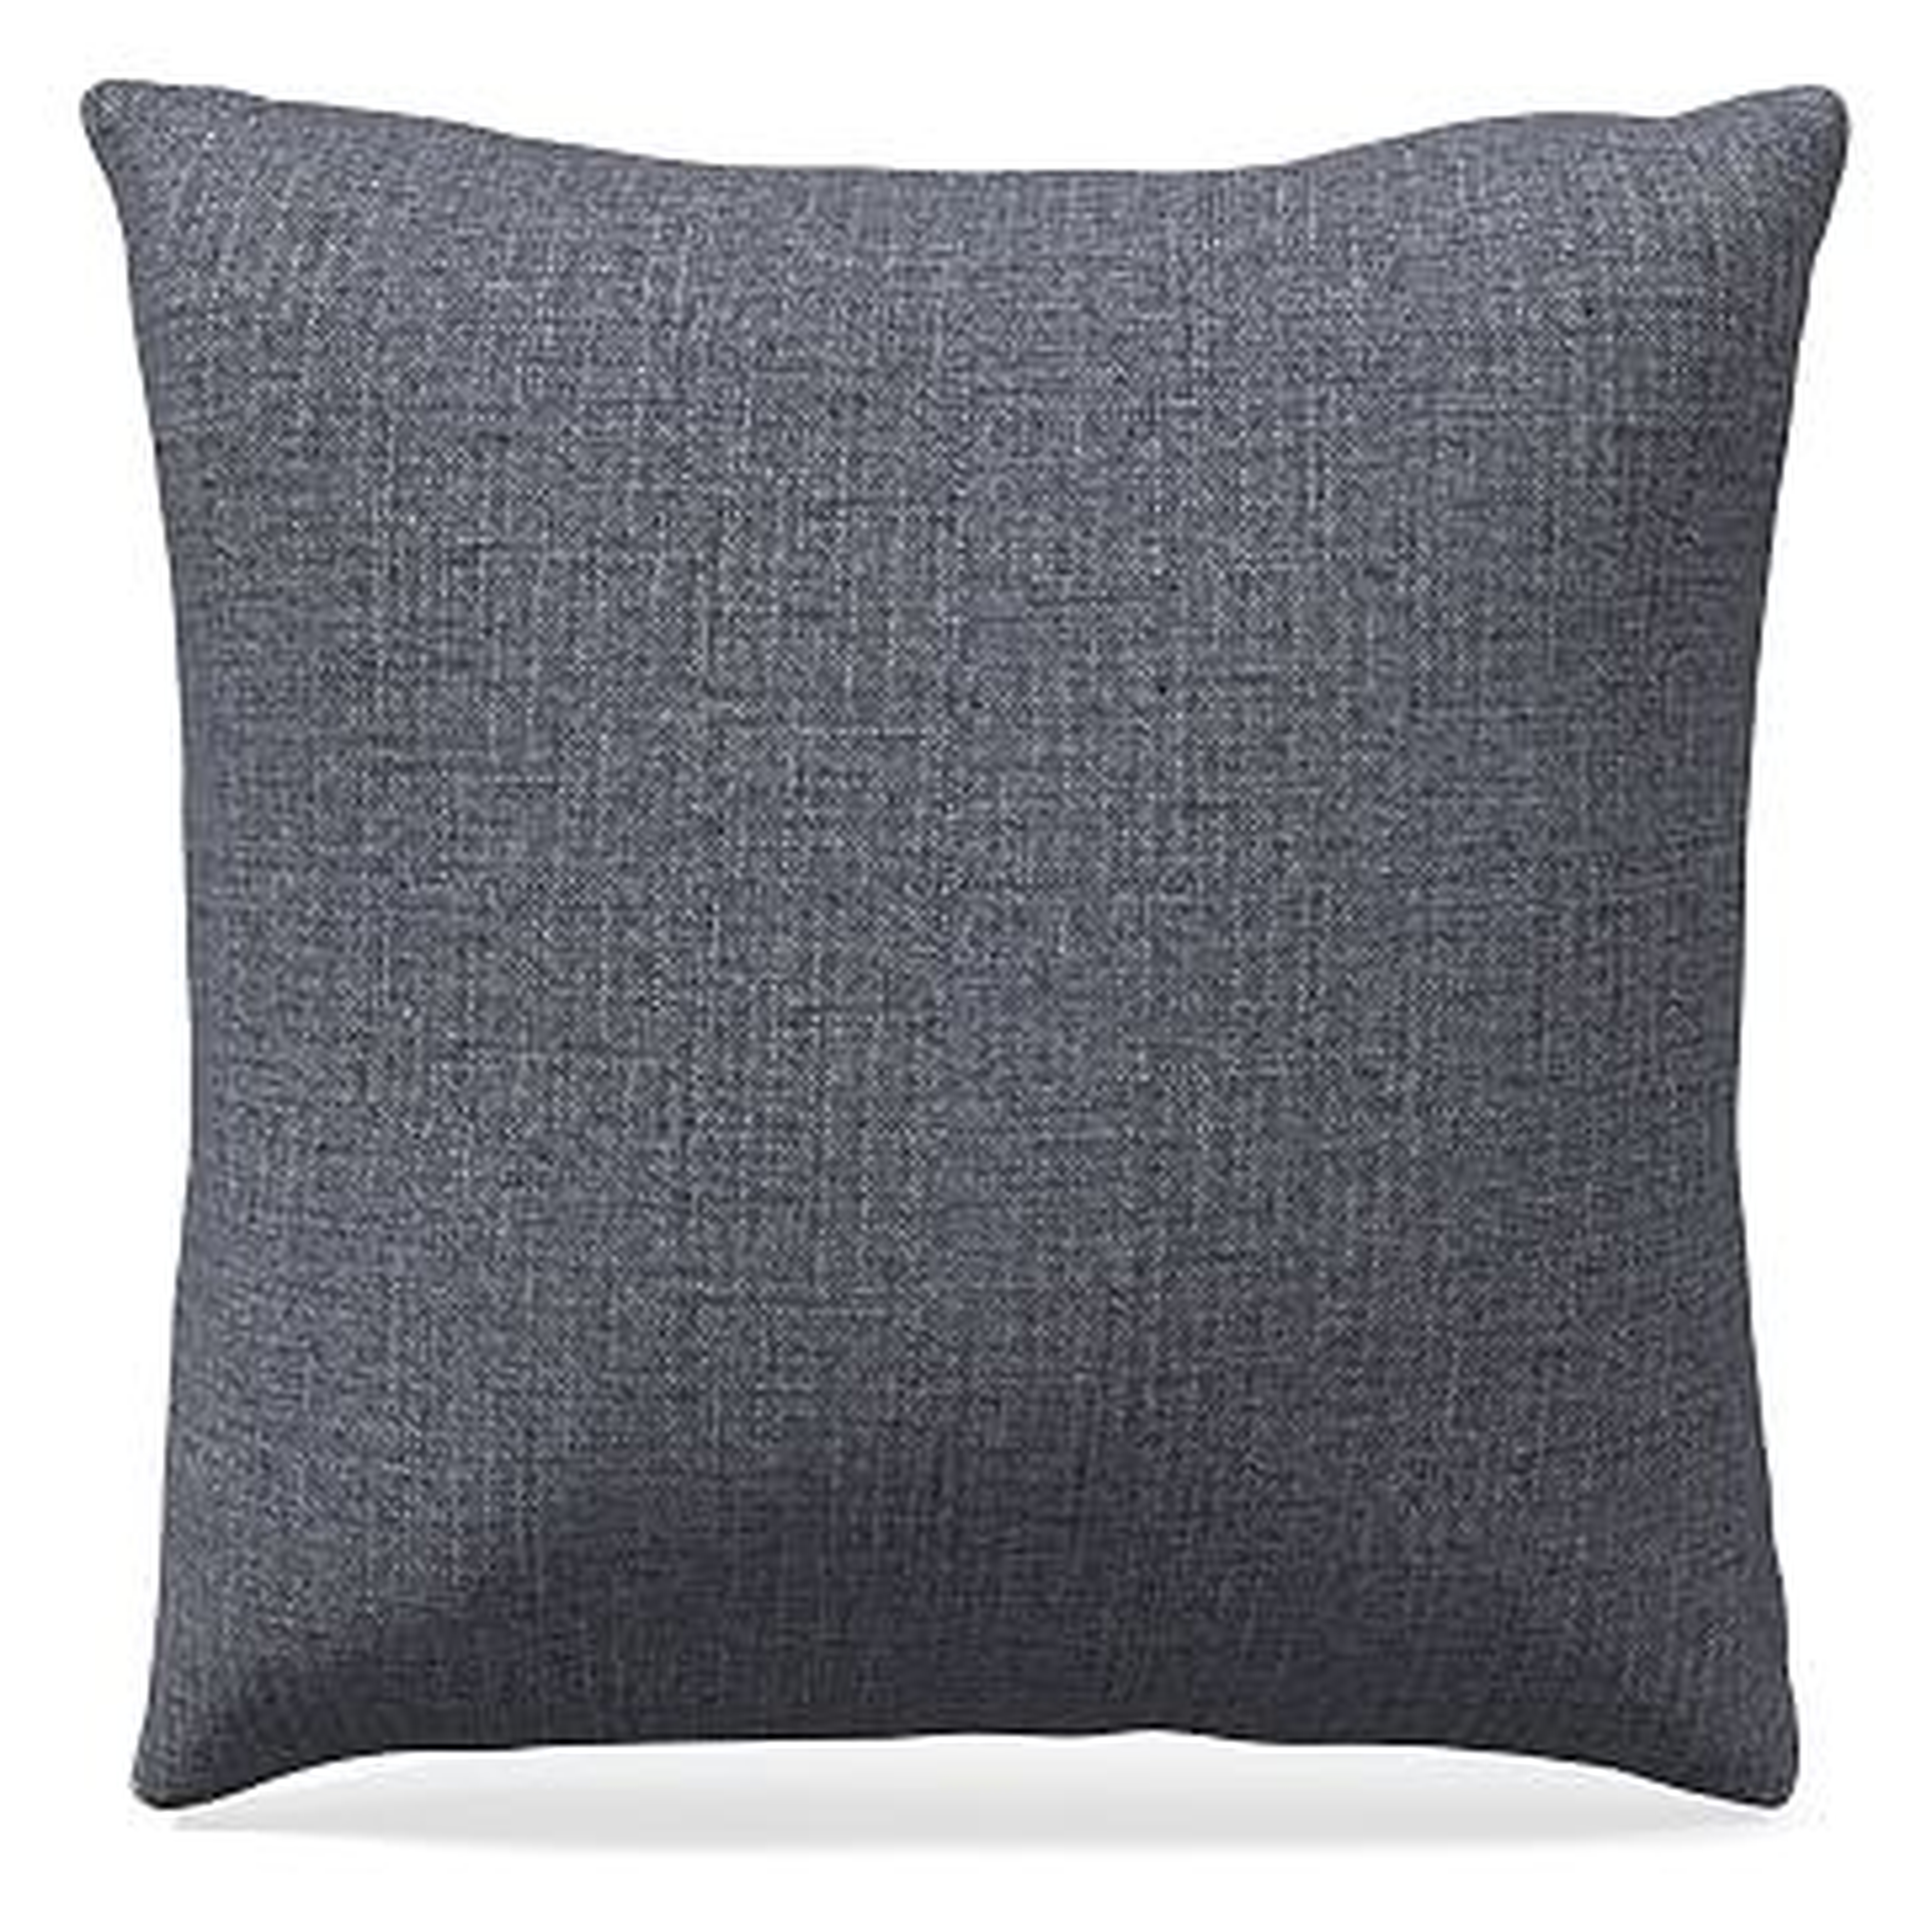 24"x 24" Pillow, N/A, Performance Yarn Dyed Linen Weave, Graphite, N/A - West Elm